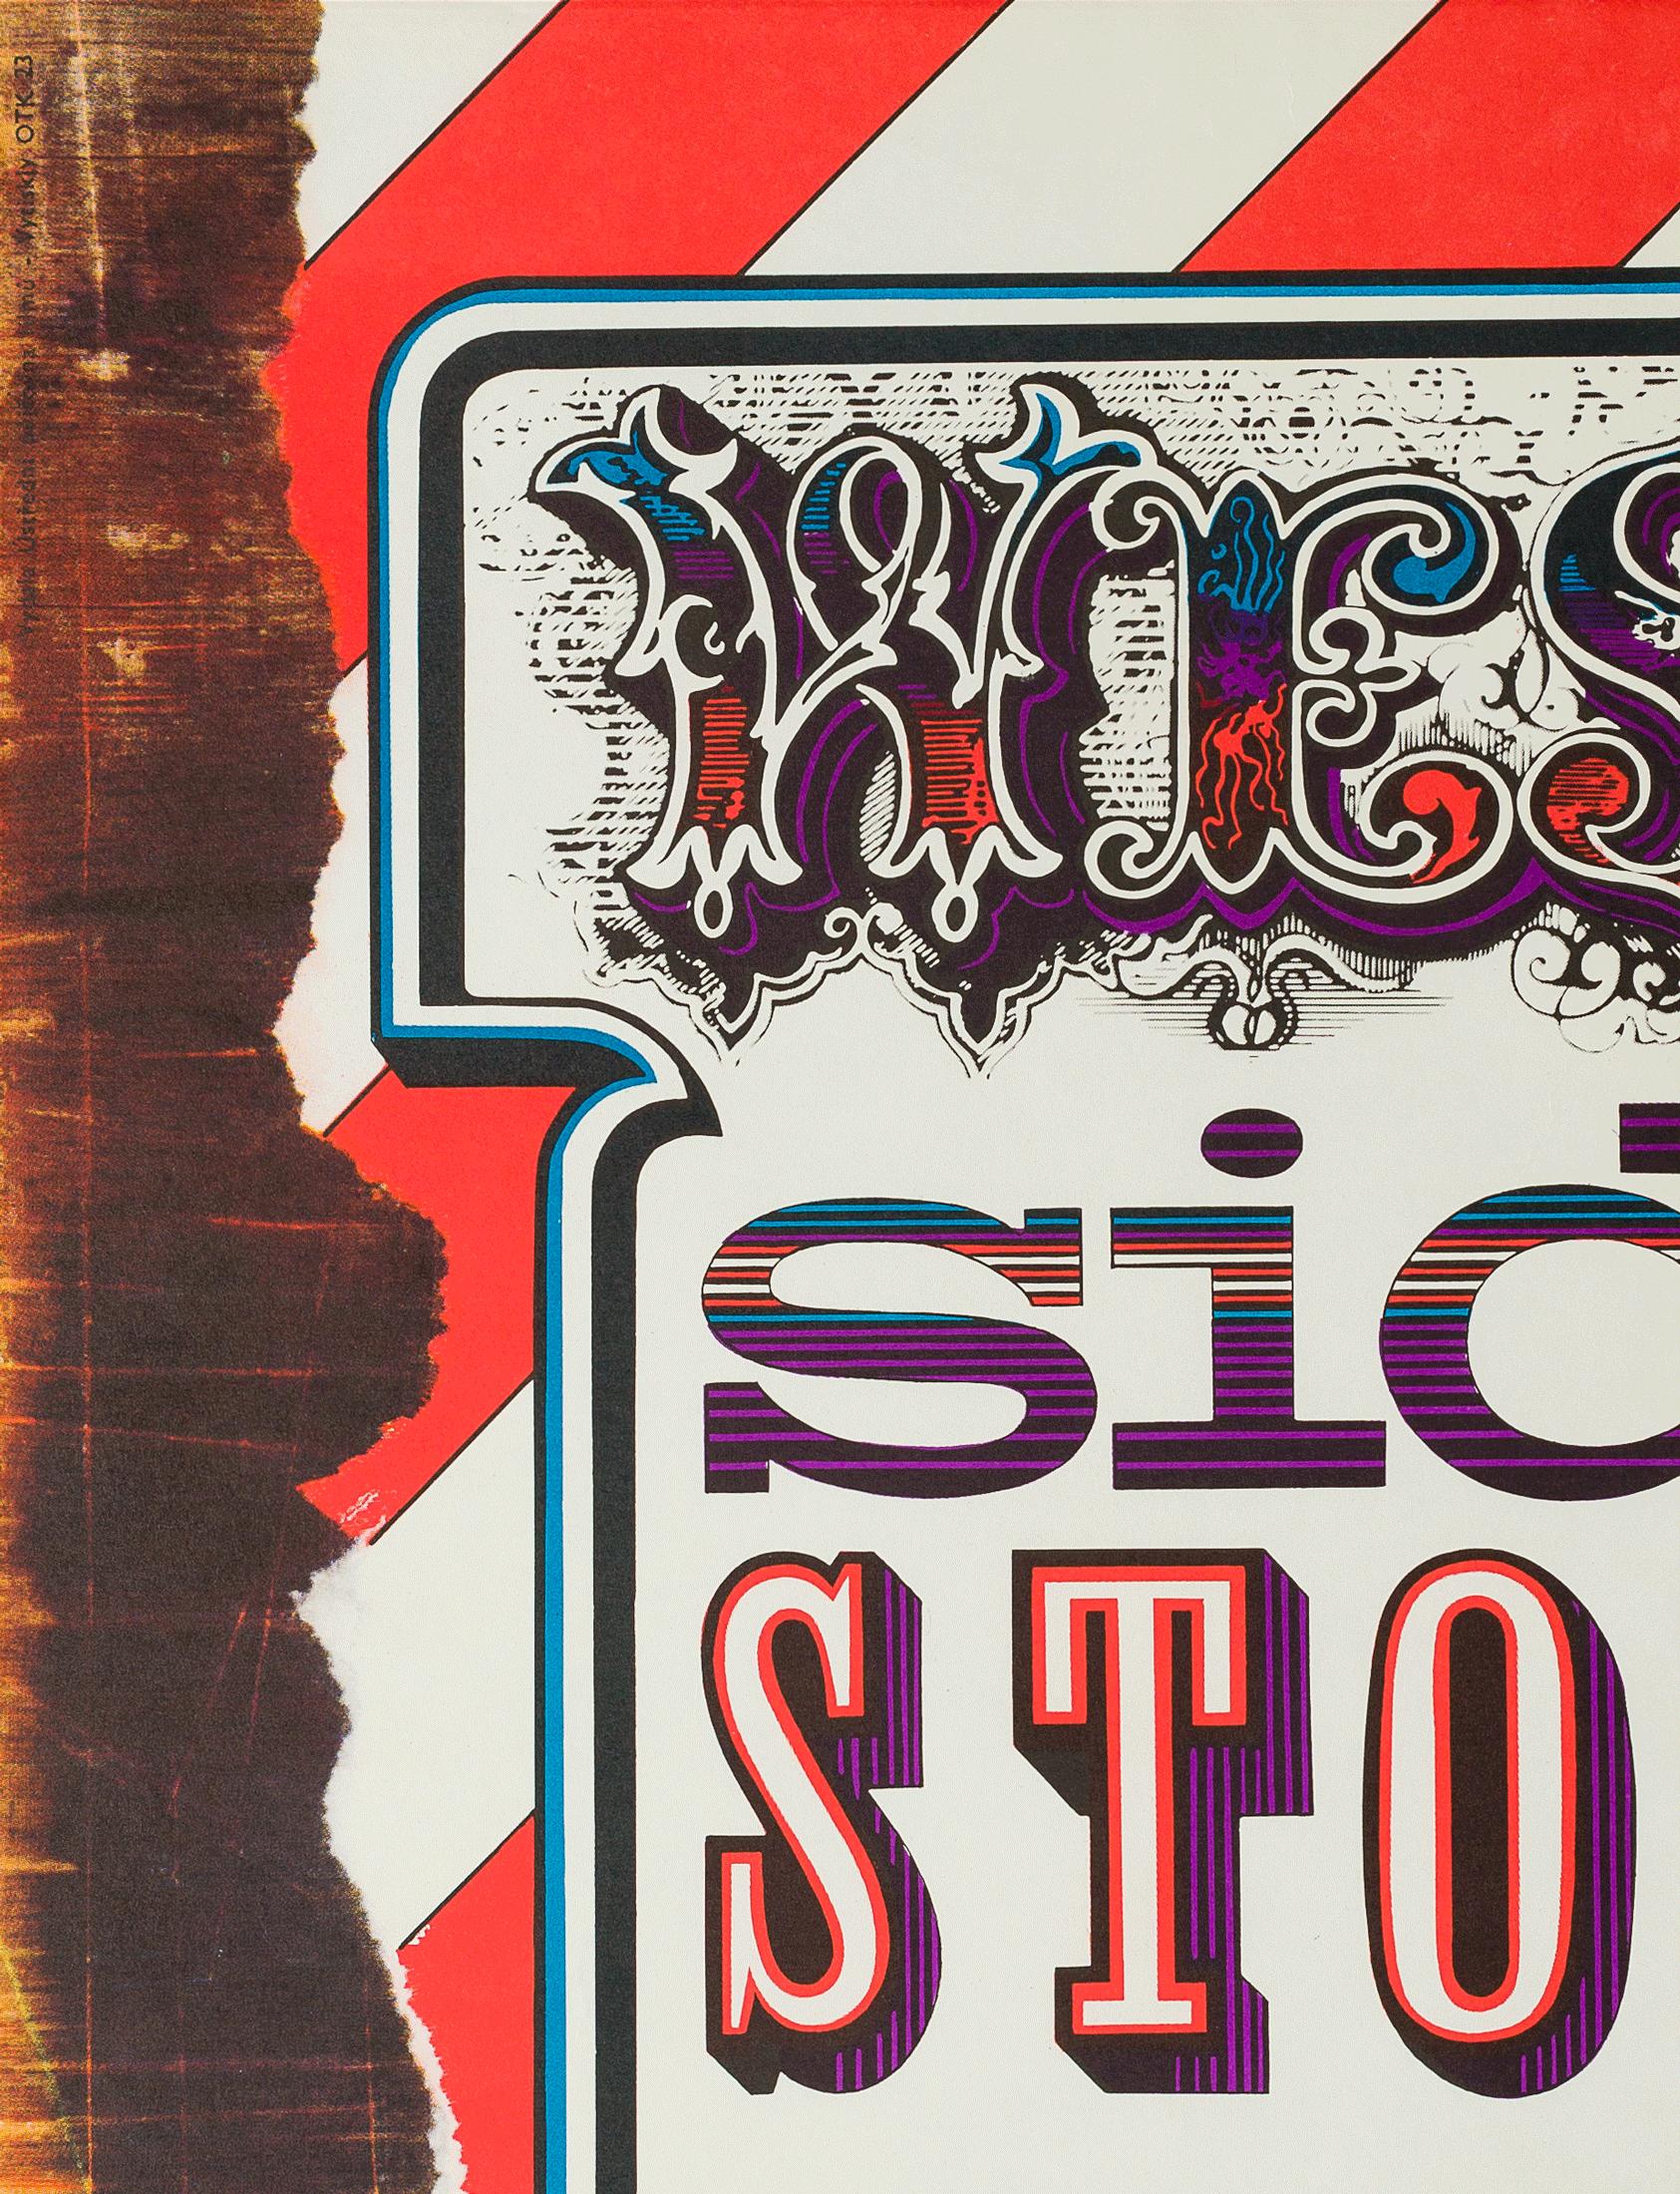 Alternative artwork features on the vintage Czech film poster for West Side Story. This is the rarer, larger format movie poster designed by Zdenek Ziegler.